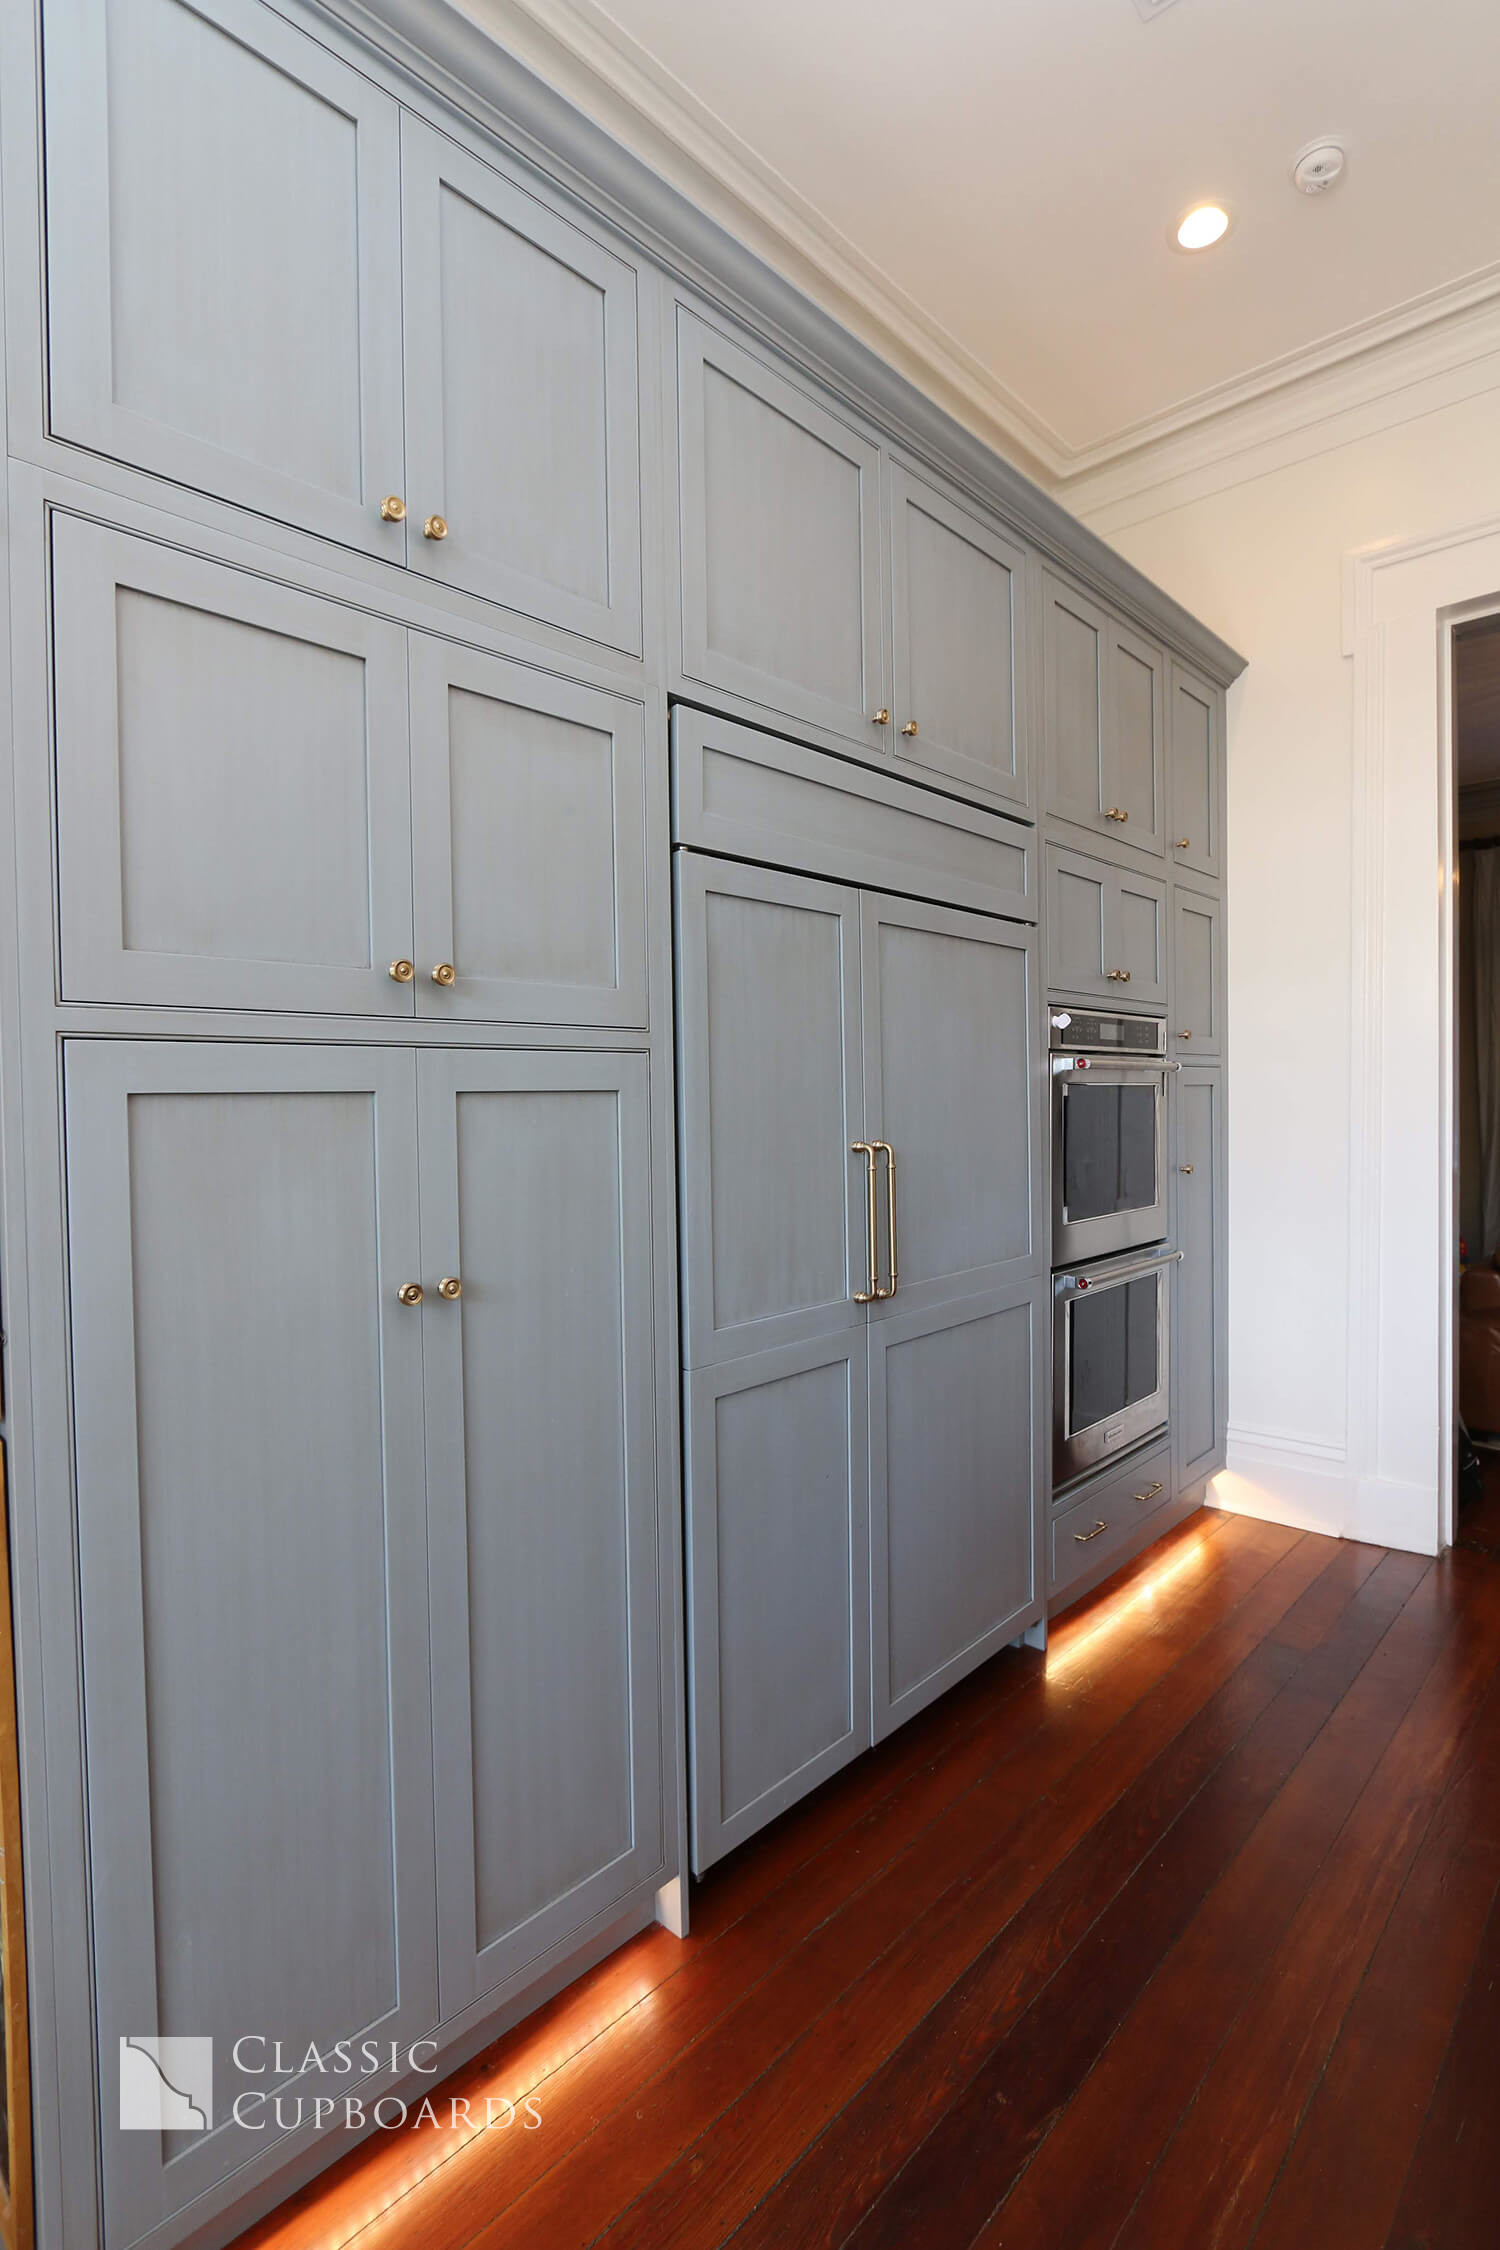 traditional kitchen cabinets